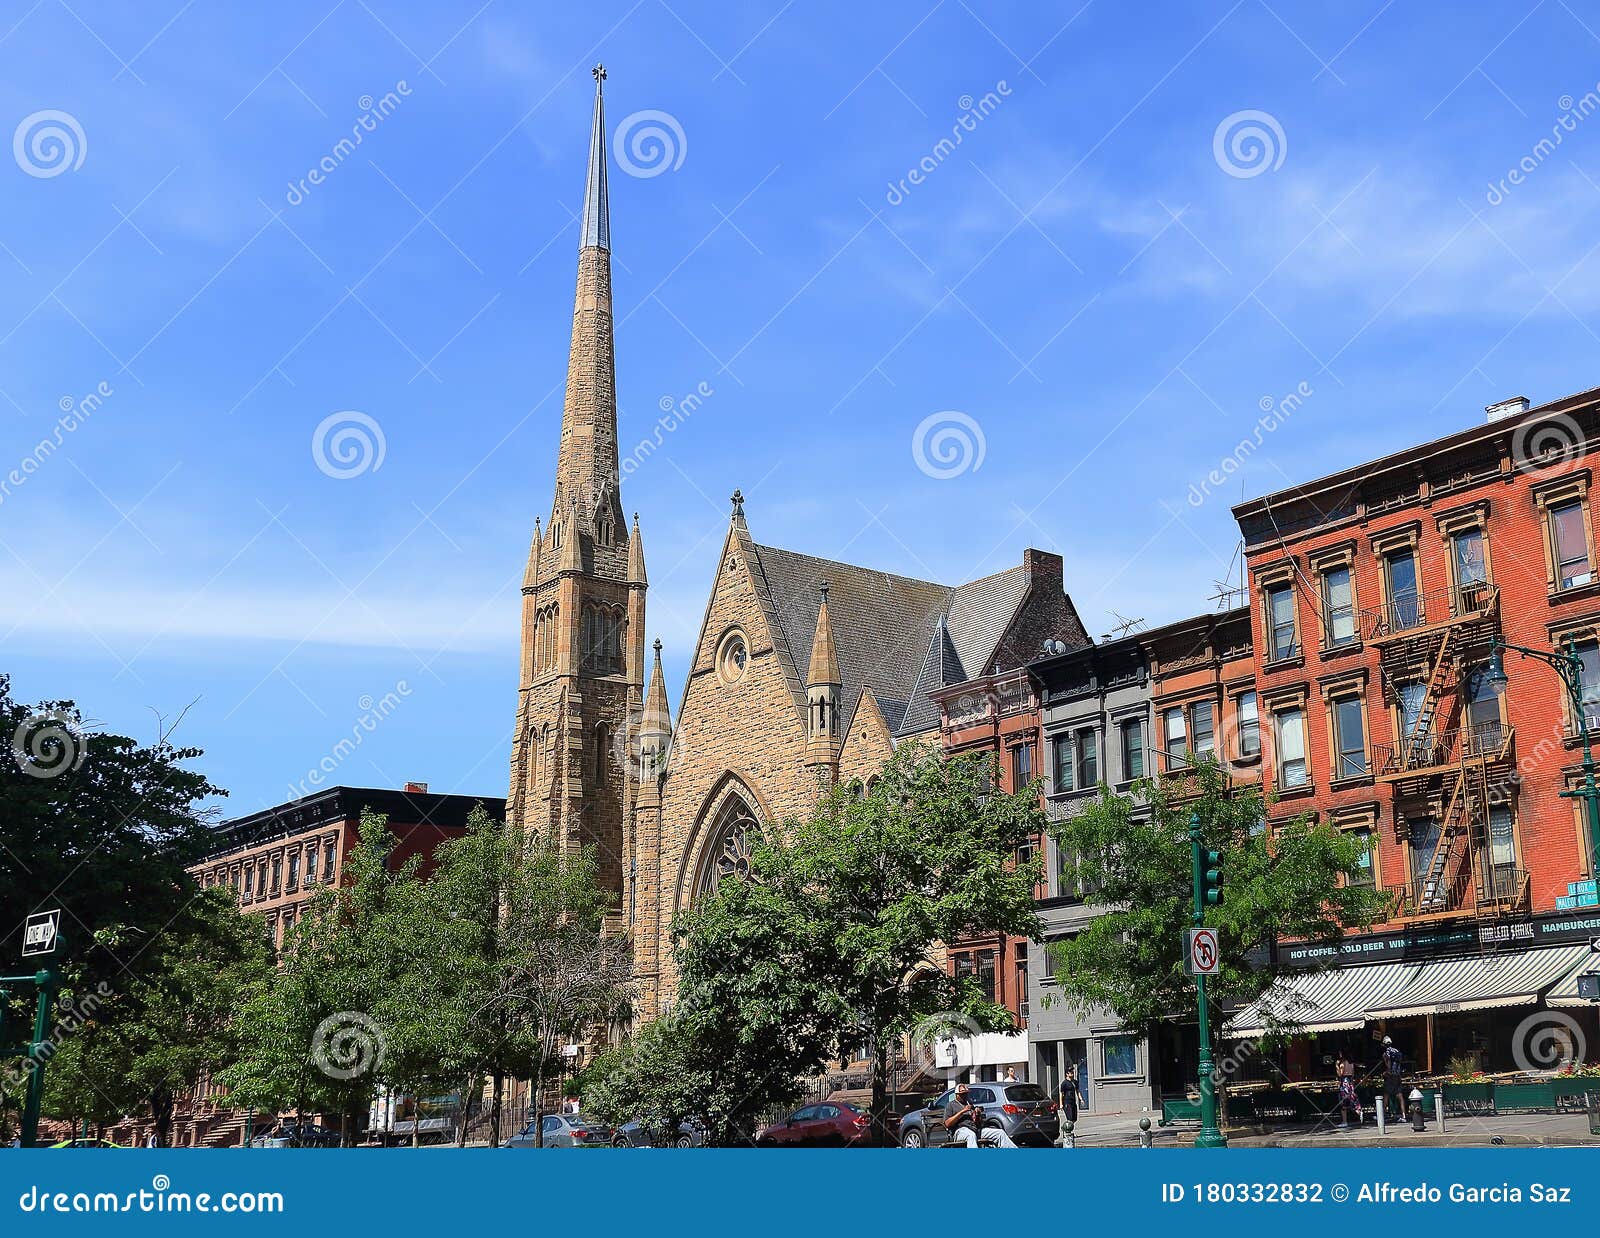 new york city, usa - june 11, 2017: view of ephesus seventh-day adventist church in 101 w 123rd st, new york, ny 10027, ee. uu on